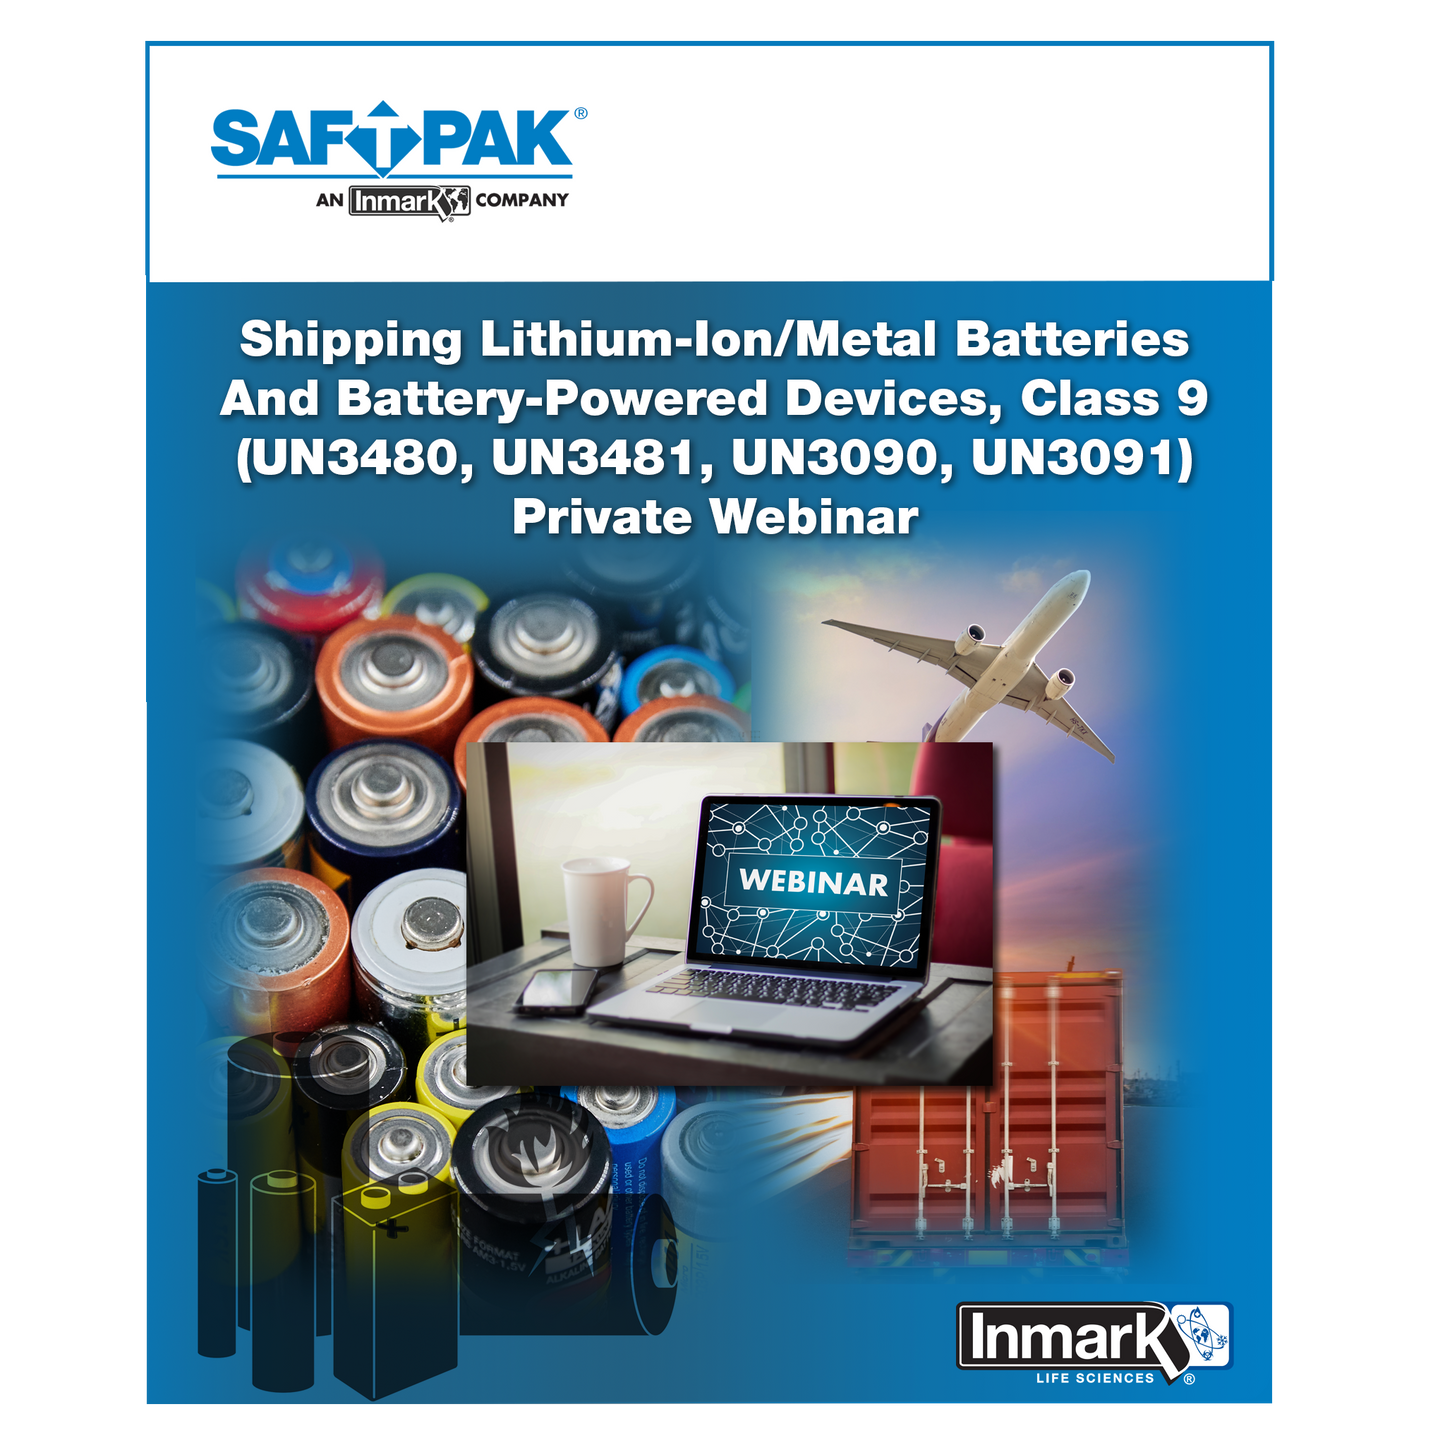 Shipping Lithium and Lithium-Ion Batteries, and Battery-Powered Devices (UN3480, UN3481, UN3090, UN3901) - Private Webinar